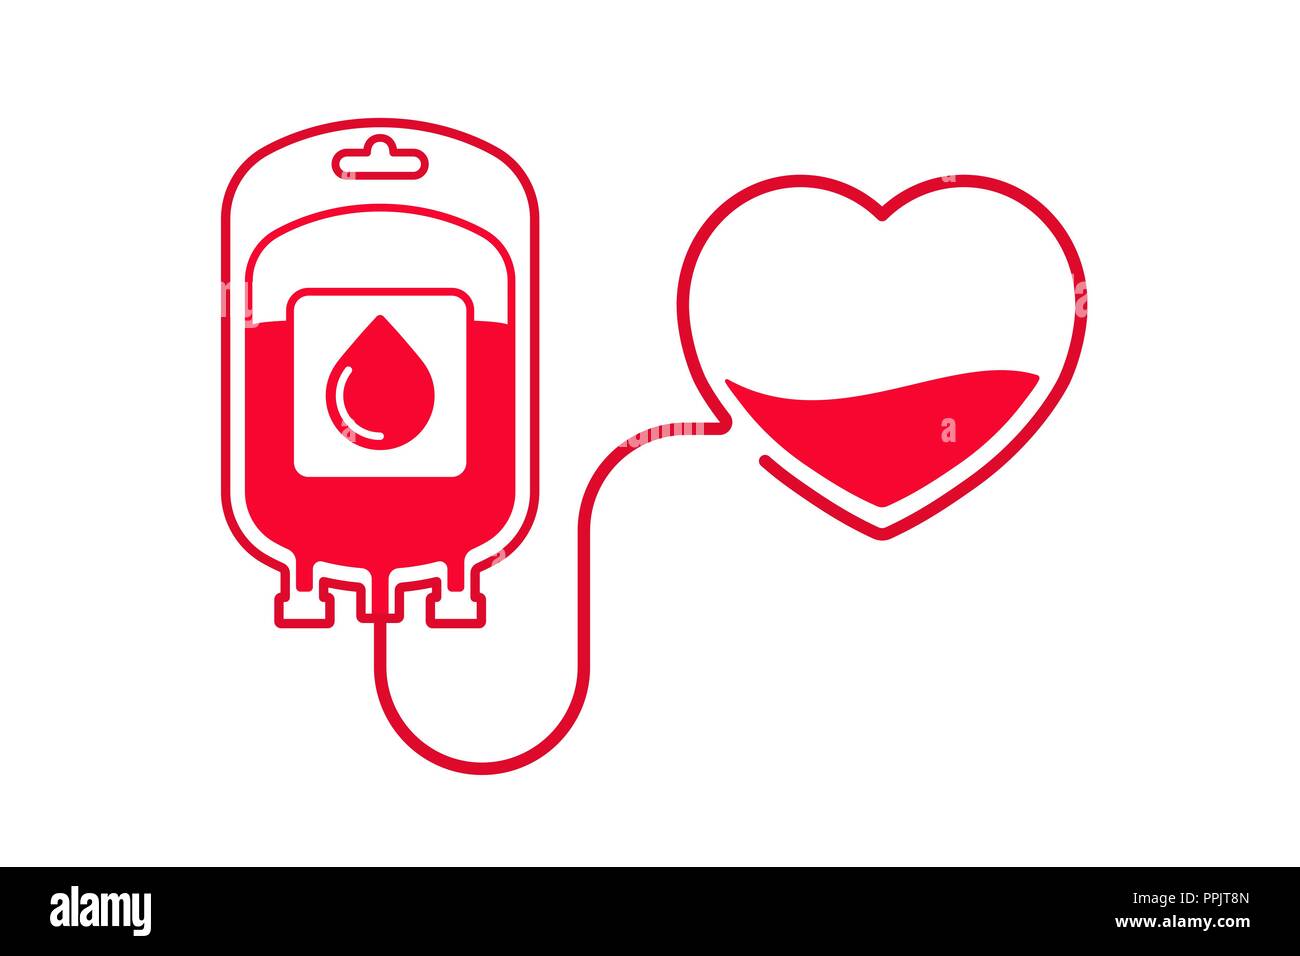 Blood donation vector illustration isolated on white background. Donate blood concept with Blood Bag and heart. World blood donor day - June 14. Stock Vector